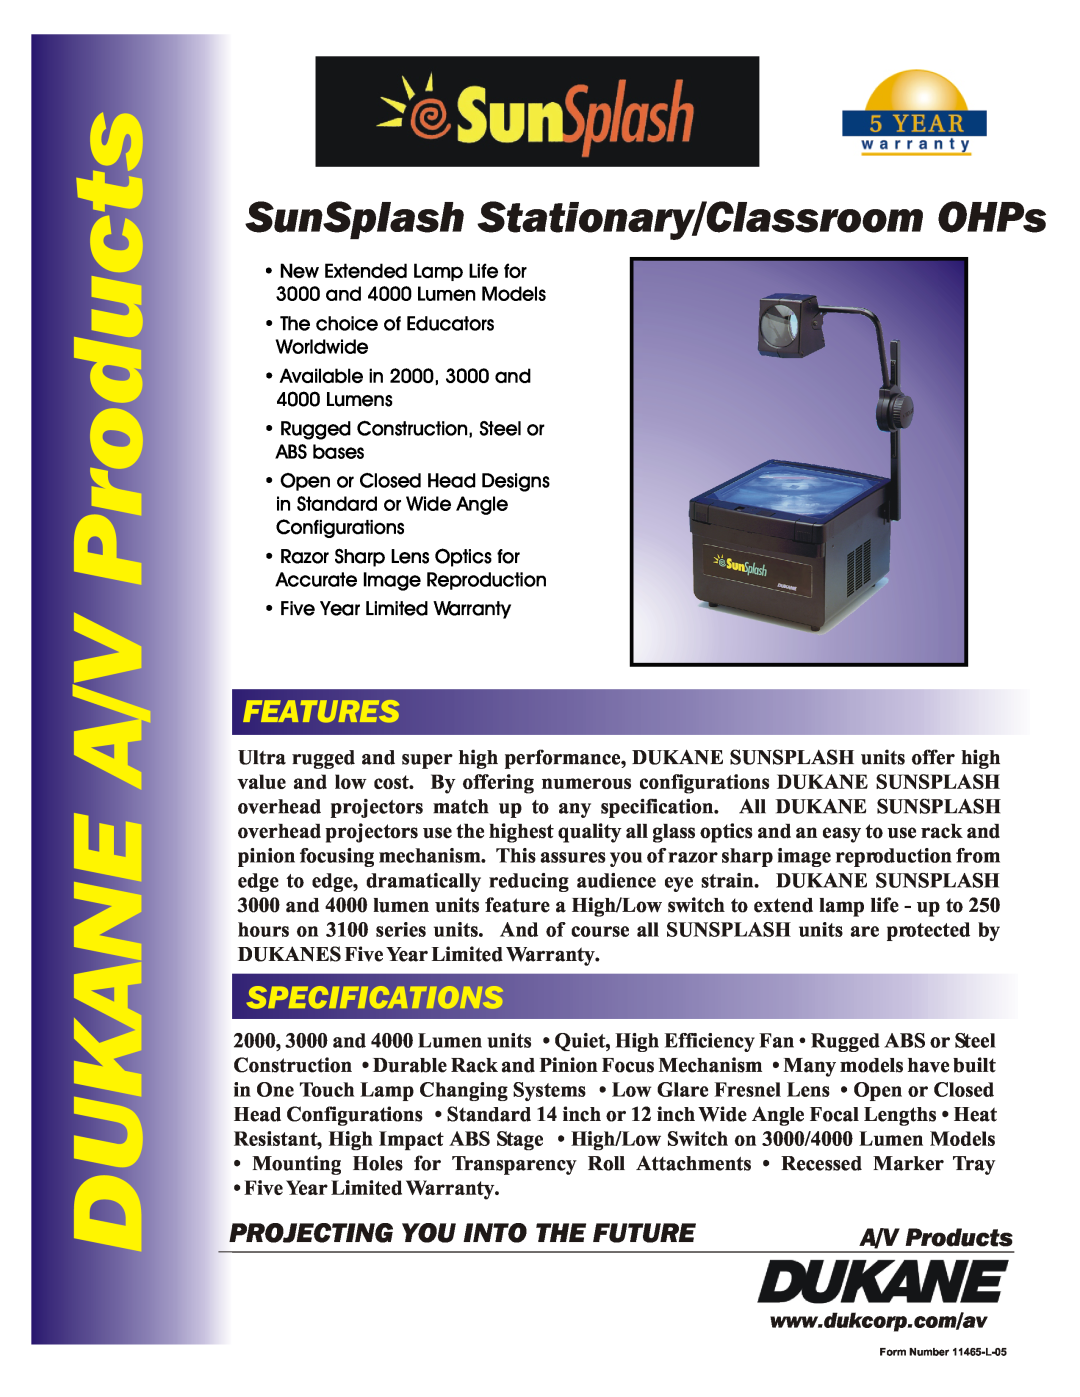 Dukane 2100 Series specifications DUKANE A/V Products, SunSplash Stationary/Classroom OHPs, Features, Specifications 